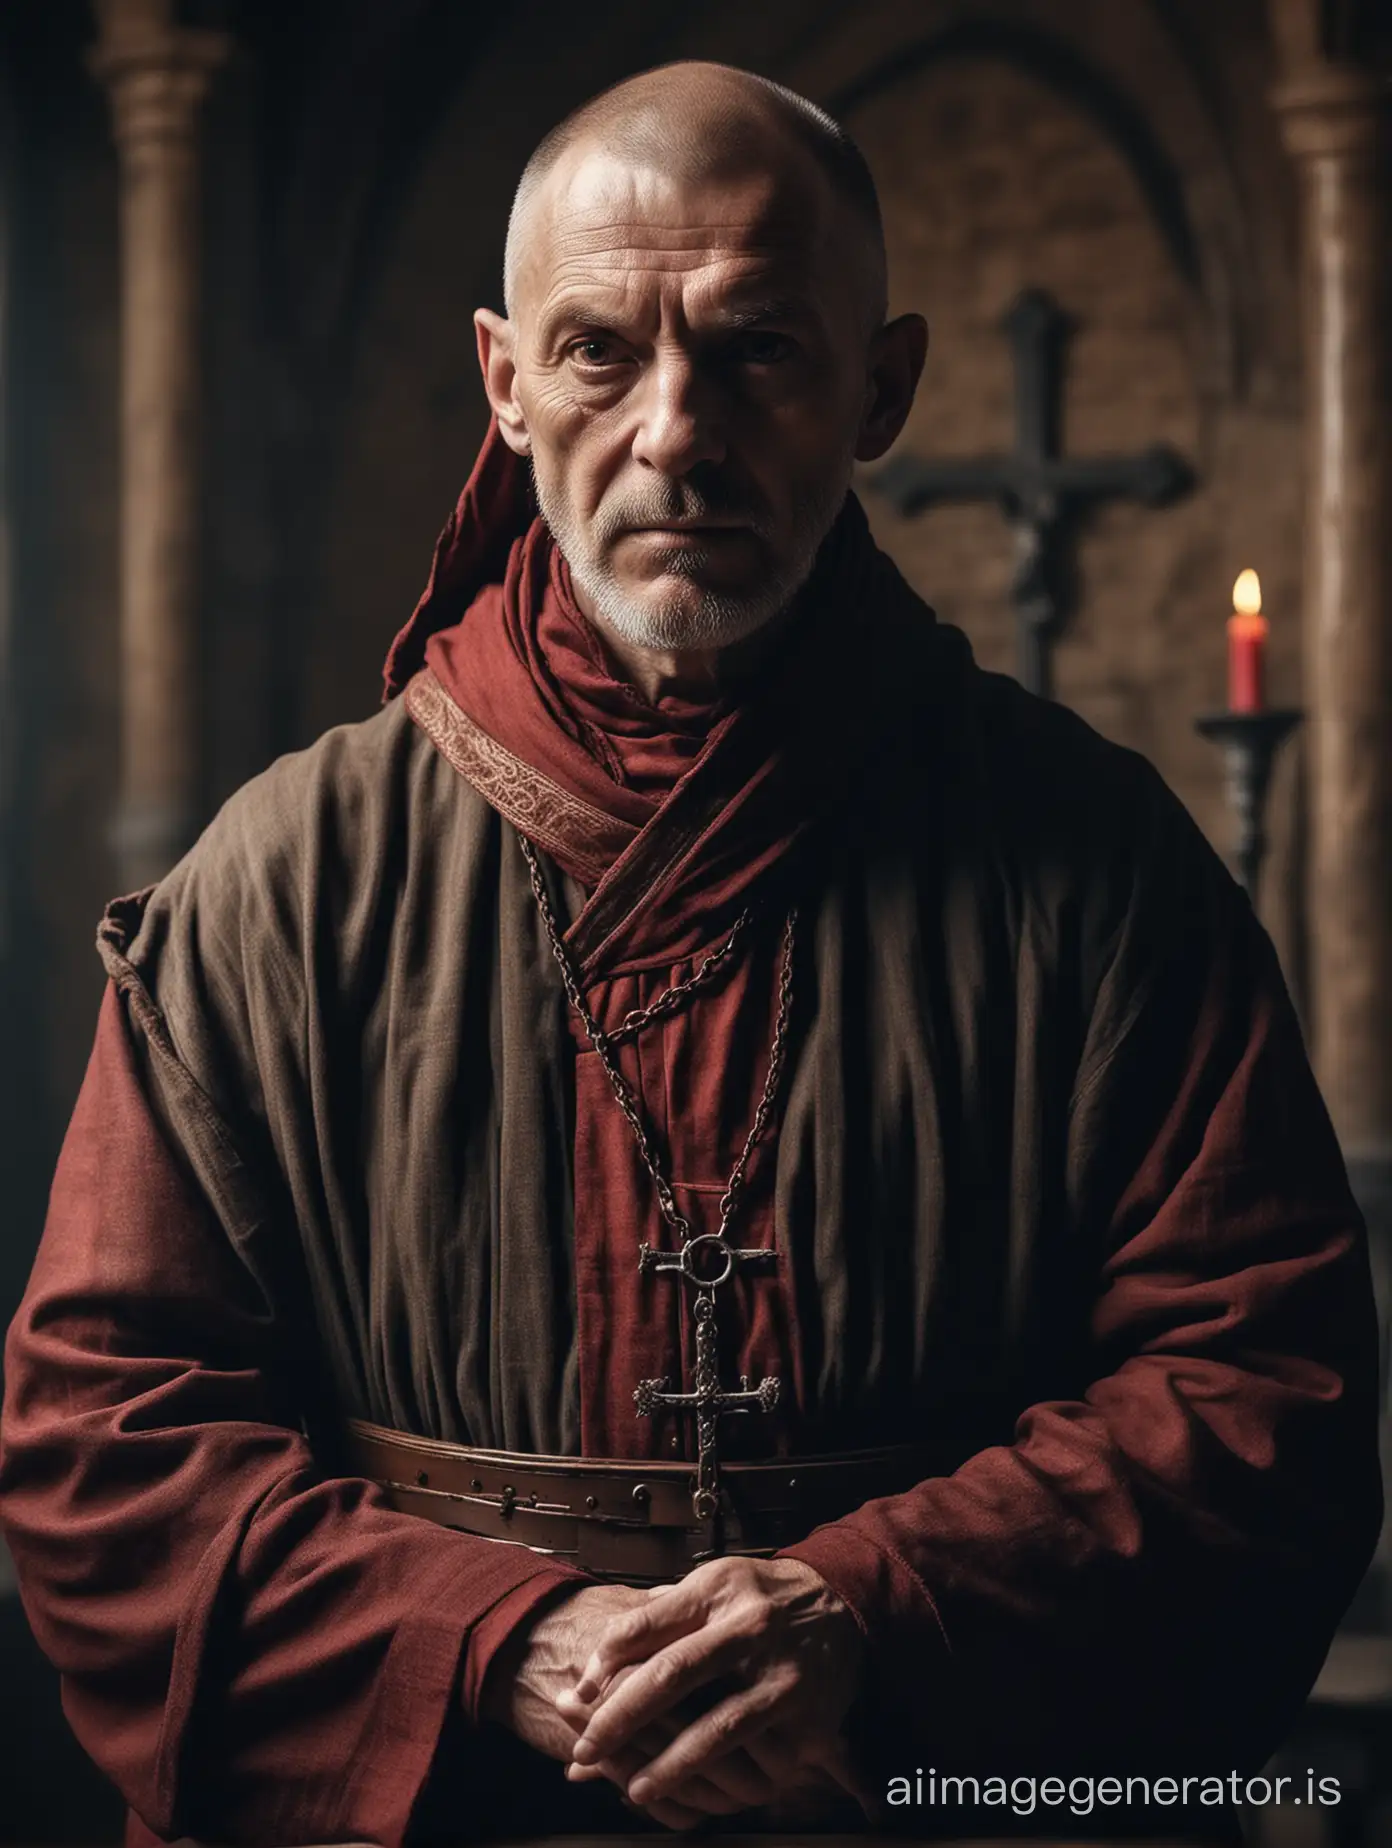 Portrait of a 60-year-old inquisitor monk, in a monastery in the Middle Ages. Bloodthirsty and specialized in torture, in the style of the film THE NAME OF THE ROSE.